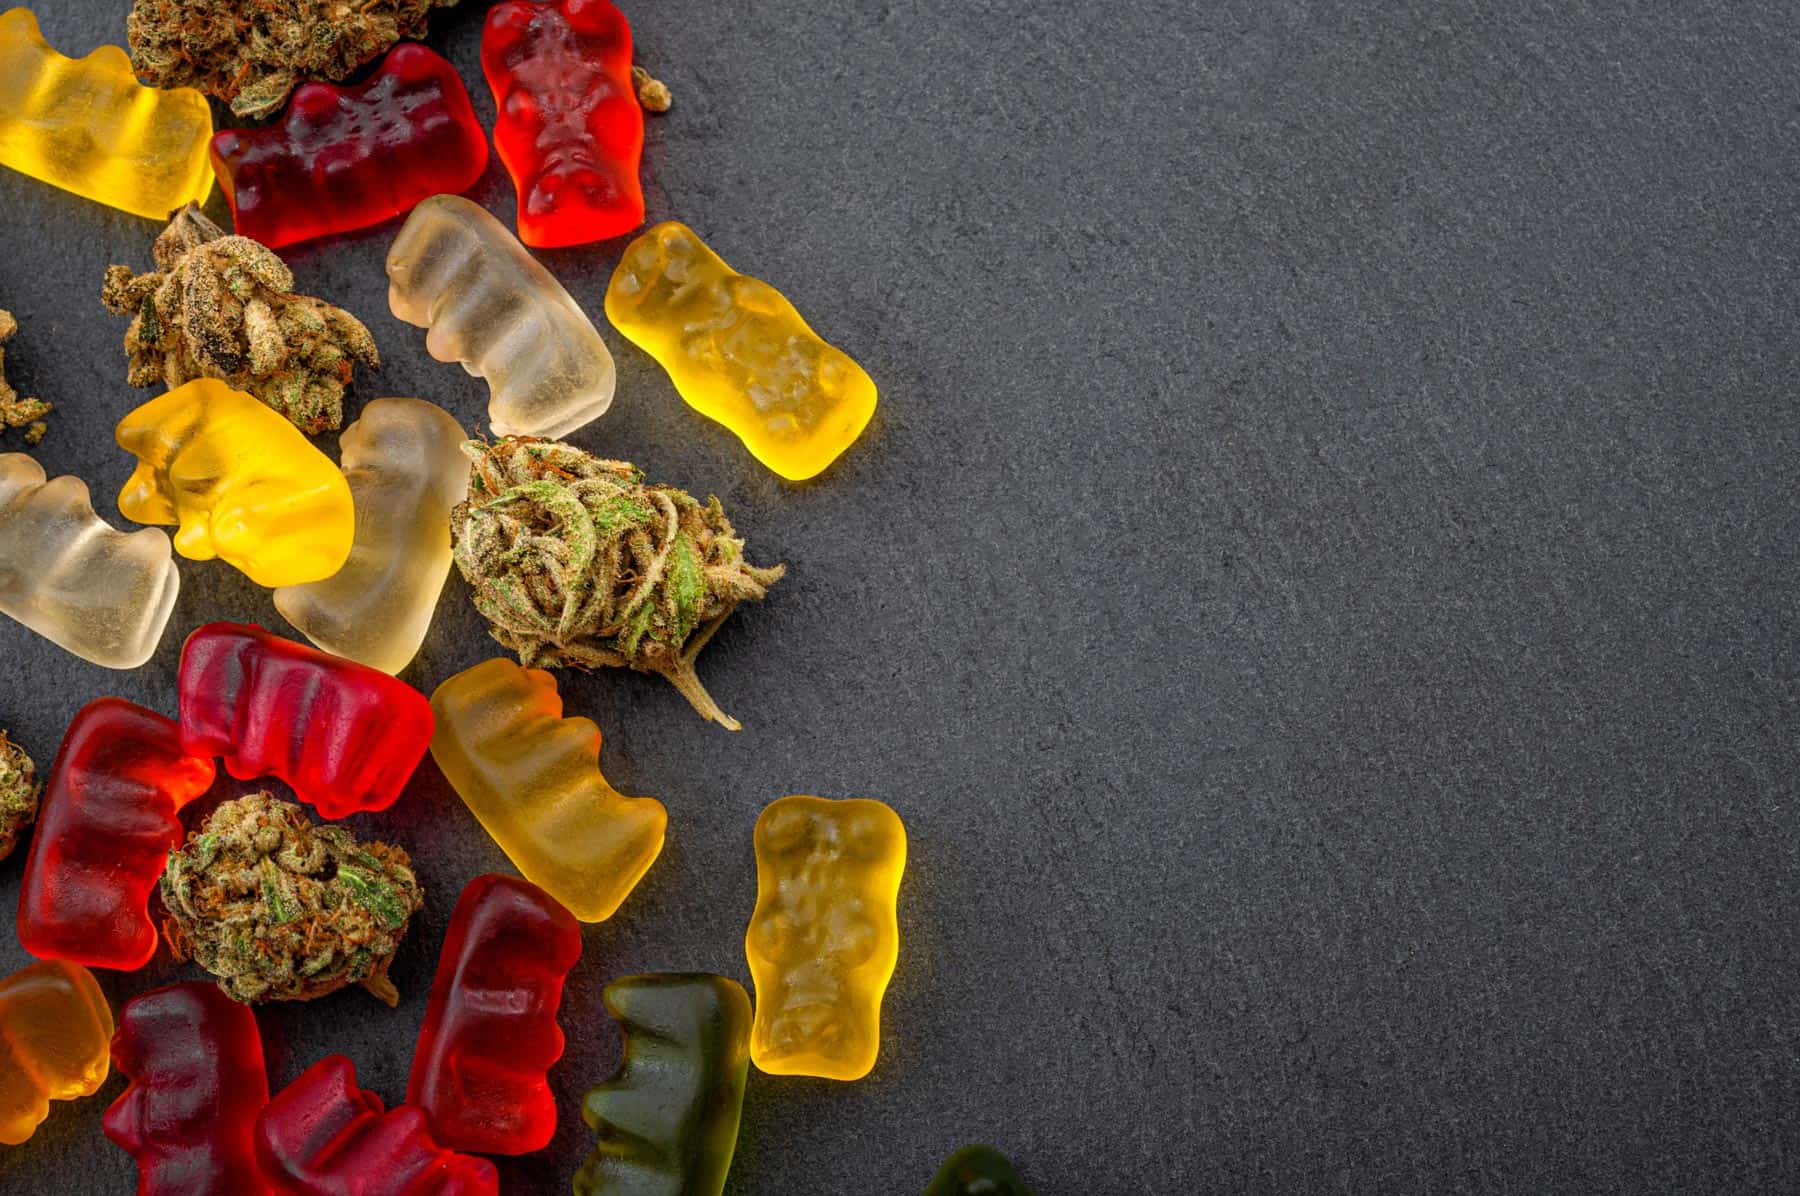 Delta 8 Edibles vs. Delta 9 Edibles: Which One Packs a Bigger Punch?